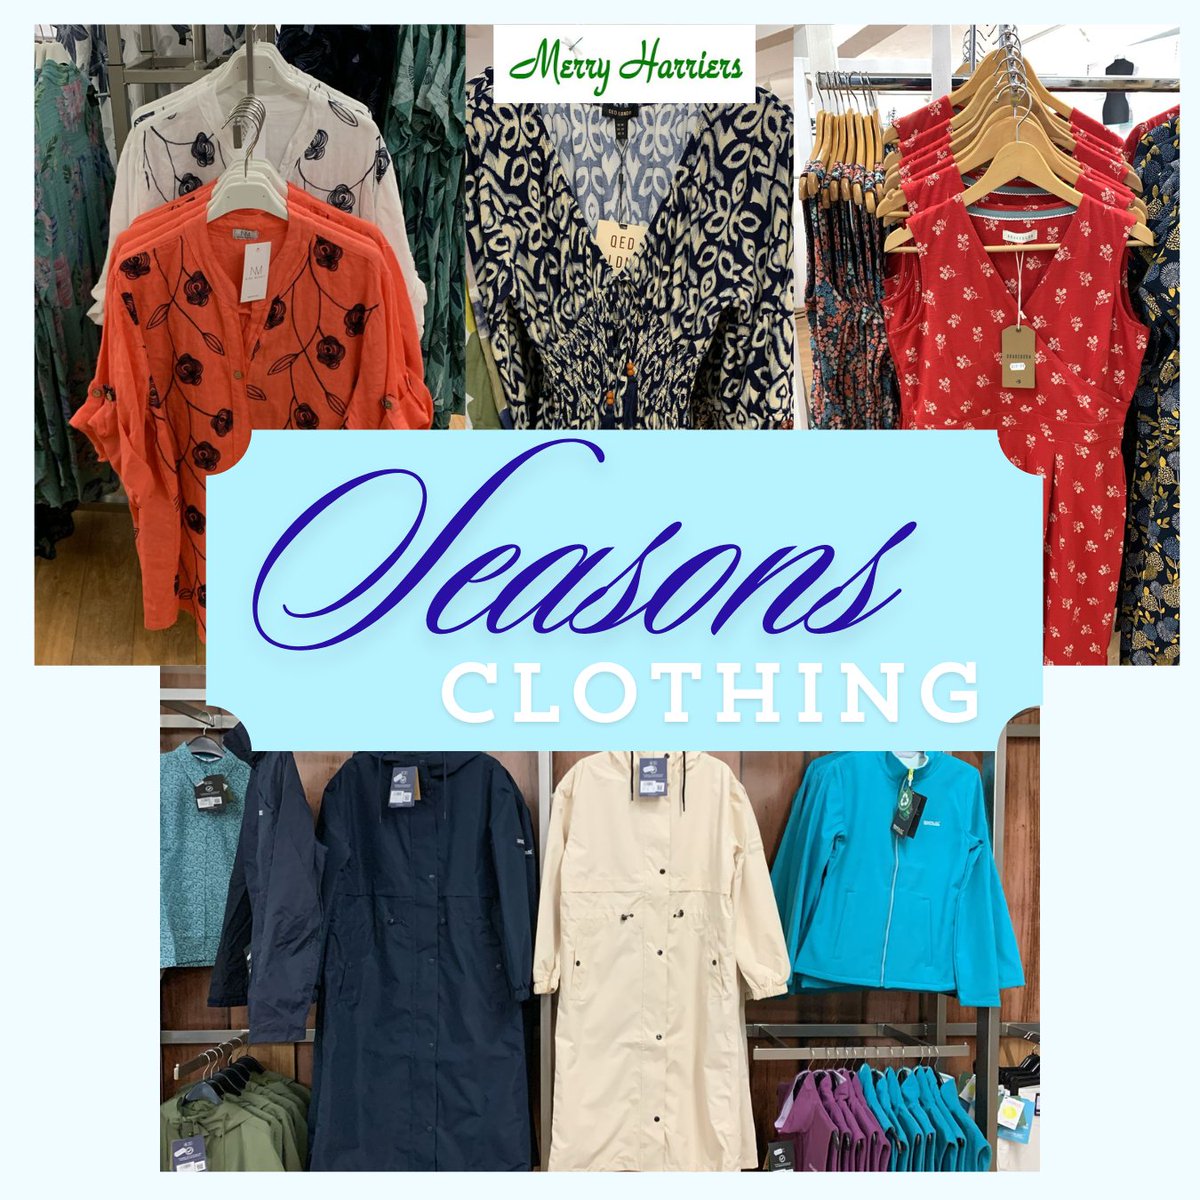 Our new department 'Seasons Clothing' is open now!
You will find both Womens Clothing and Mens Clothing with labels such as Saloos, Envy, Brakeburn, Penny Plain, Regatta, lighthouse and more!
Only Available in-Store.
merryharriers.co.uk #gardencentre #shoppingdevon #clothing